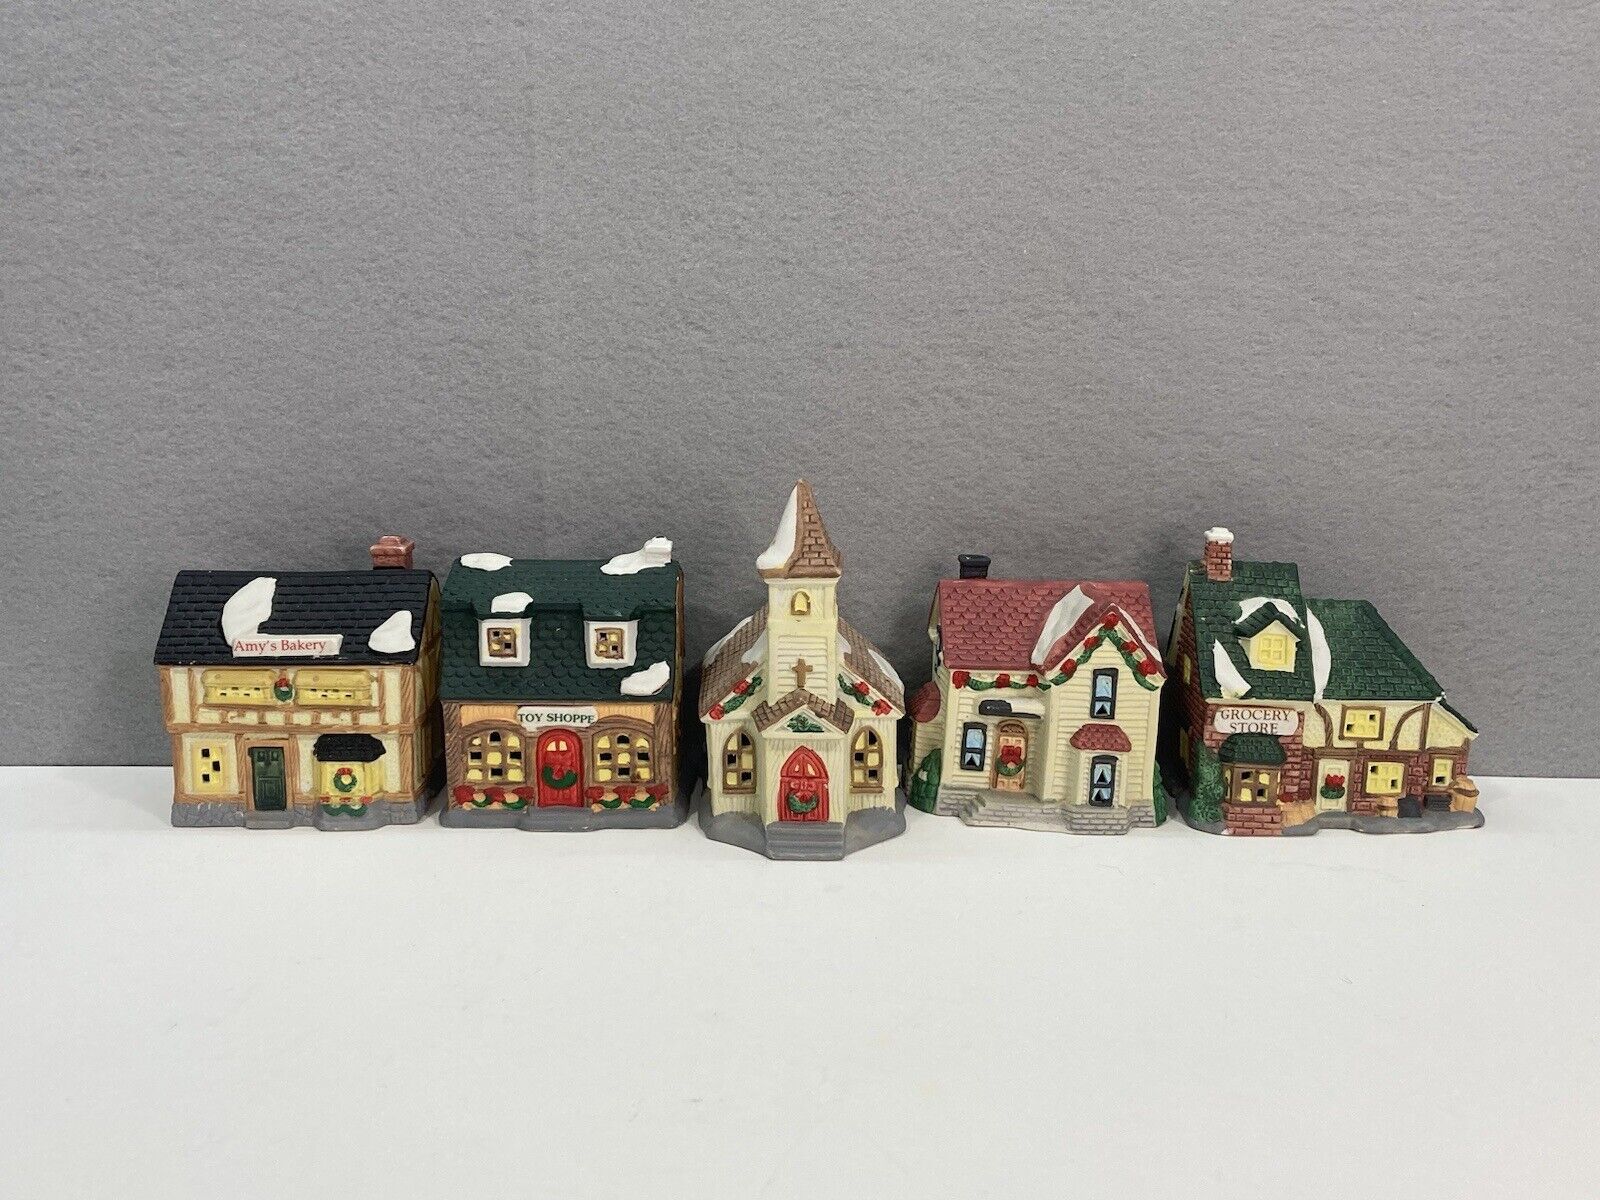 VTG Noma Dickensville Christmas Village 5 Piece Set Collectables Bakery Church